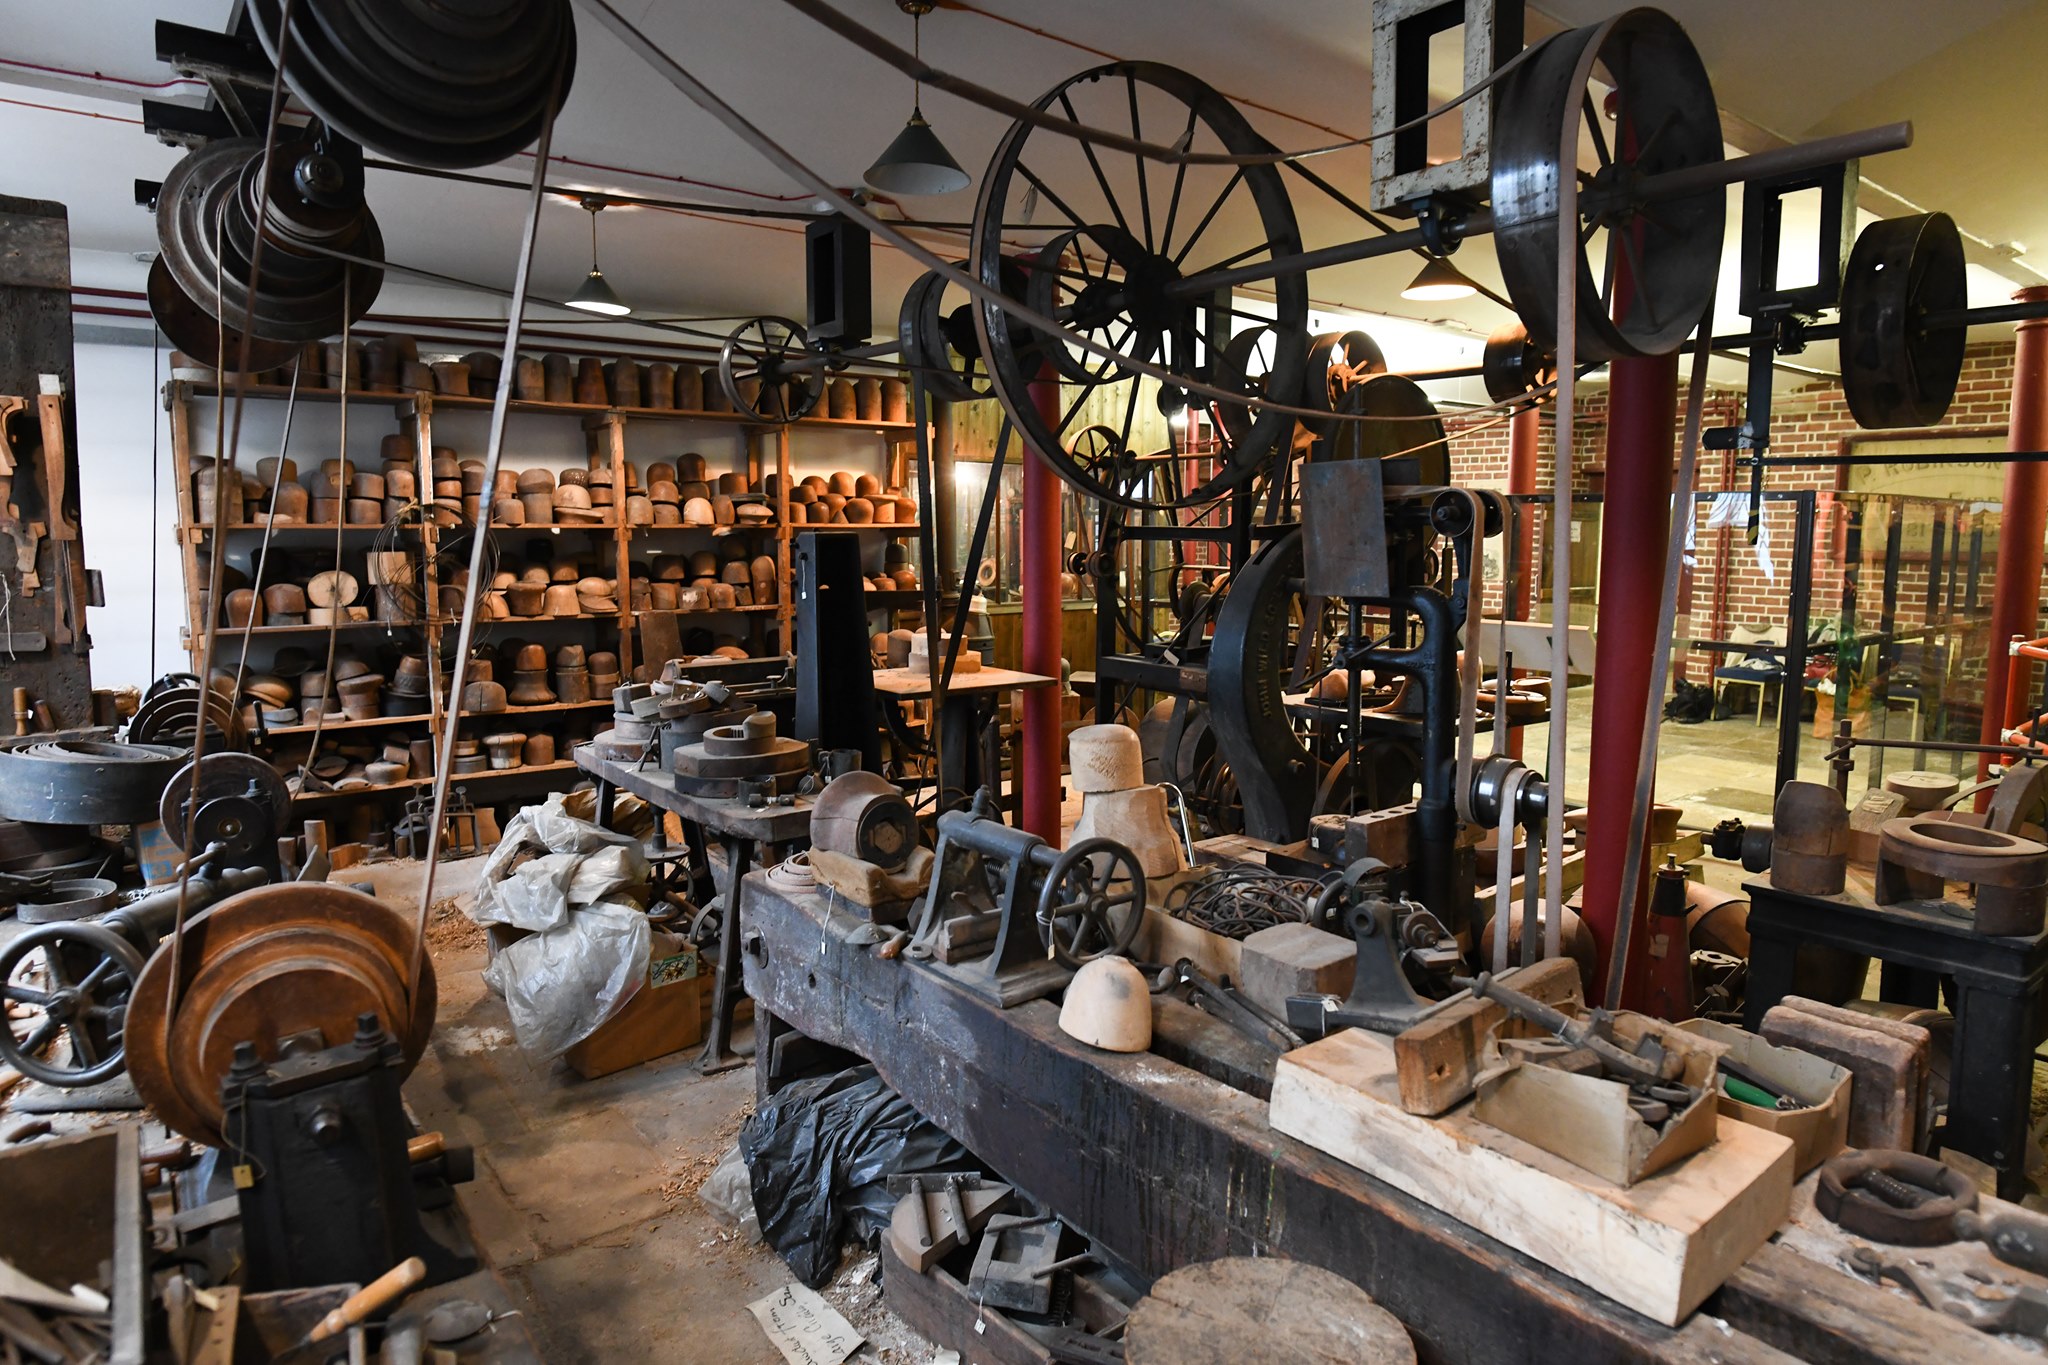 A replica of a hat factory at Stockport's Hat Works Museum